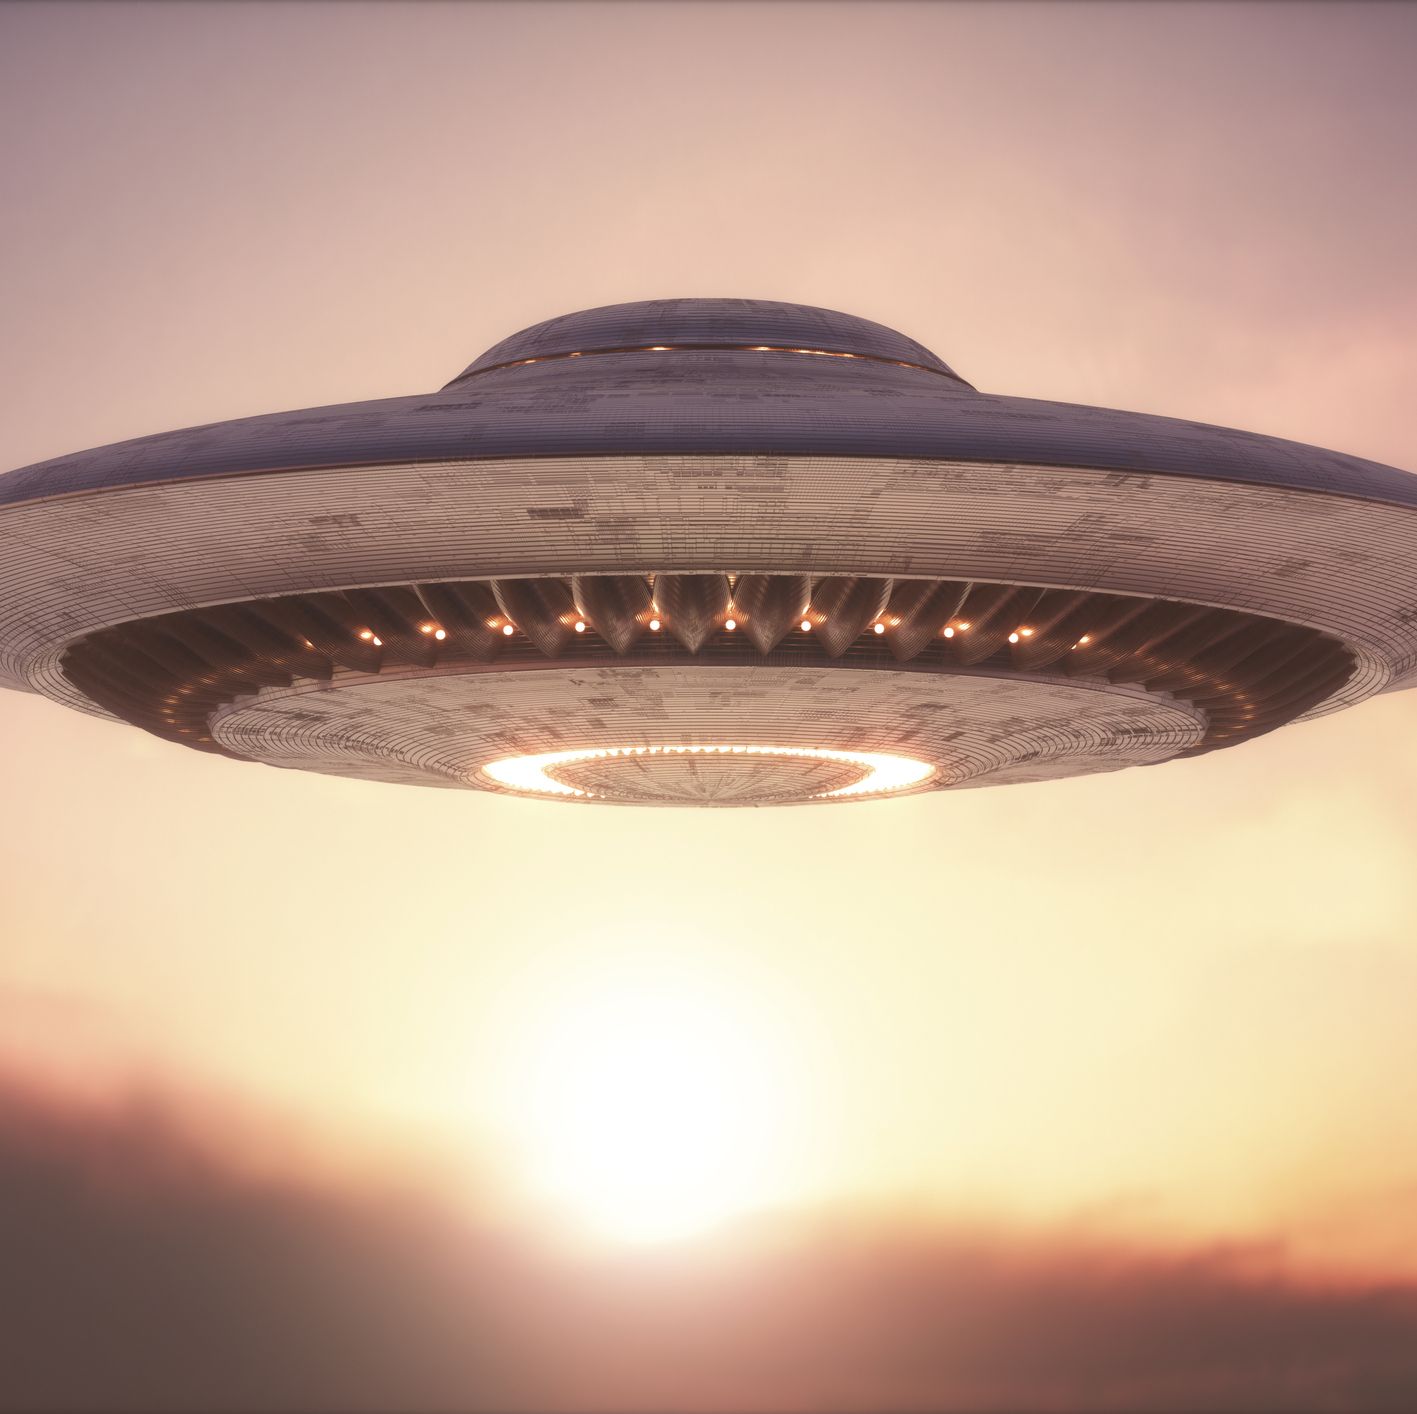 How Ufology, the Art of Studying UFOs, Has Evolved From a Fringe Field to Serious Science